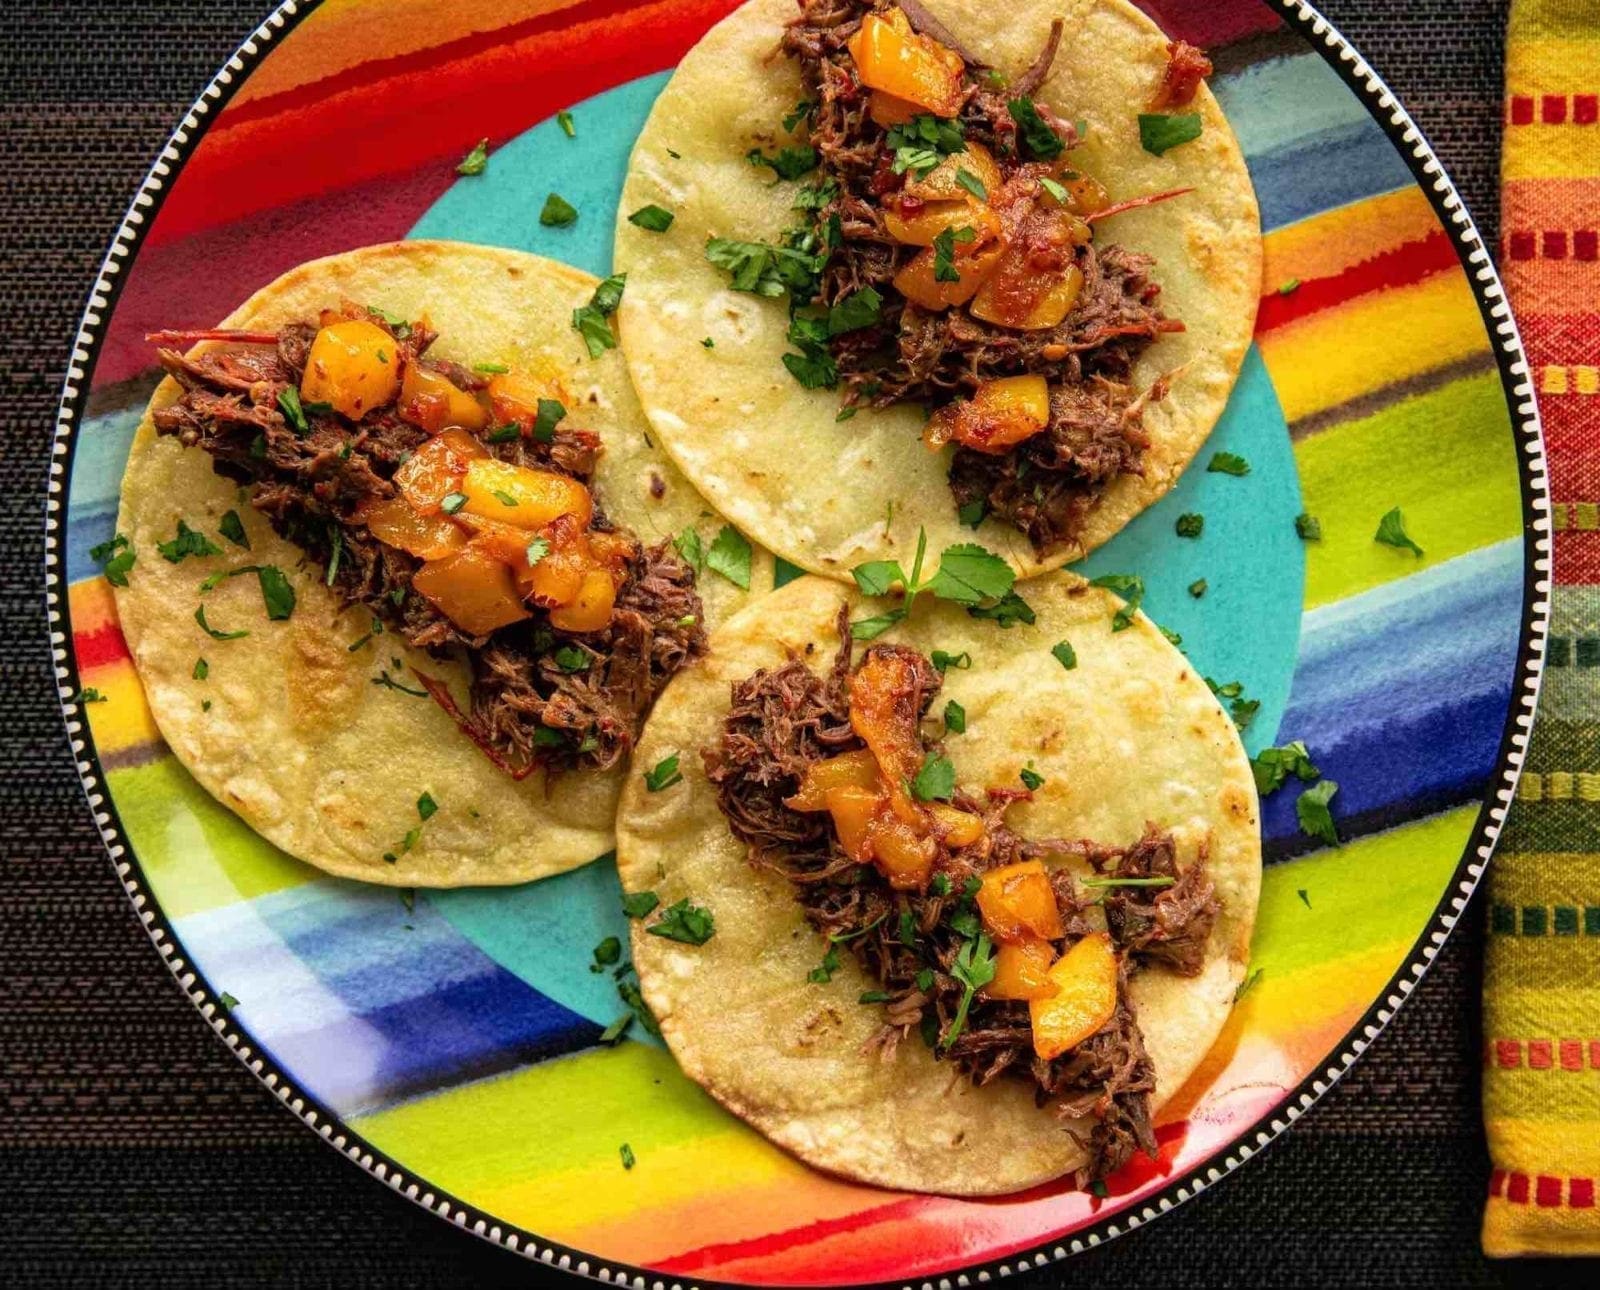 Three pulled-pheasant tacos on a colorful plate